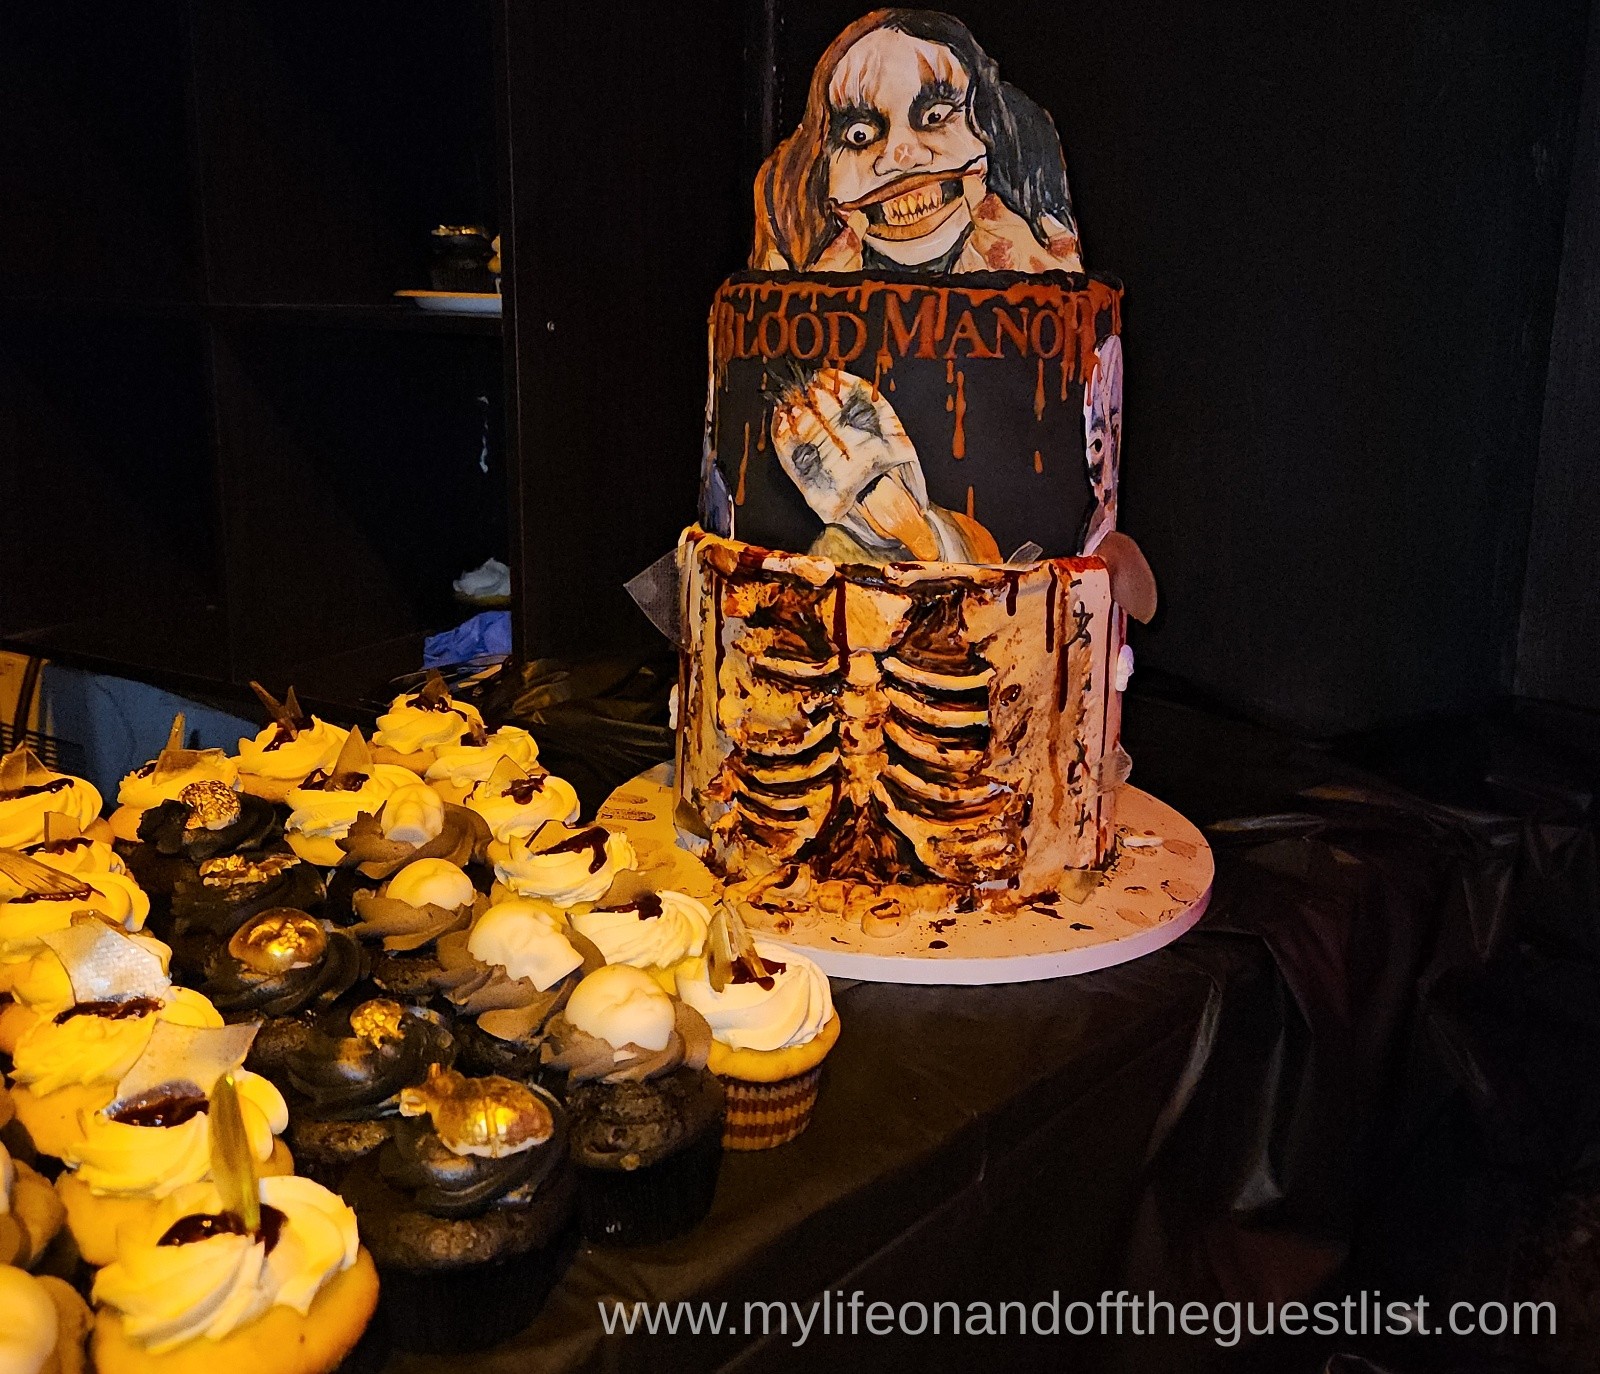 Celebrating 20 Years of Terror at Blood Manor, NYC